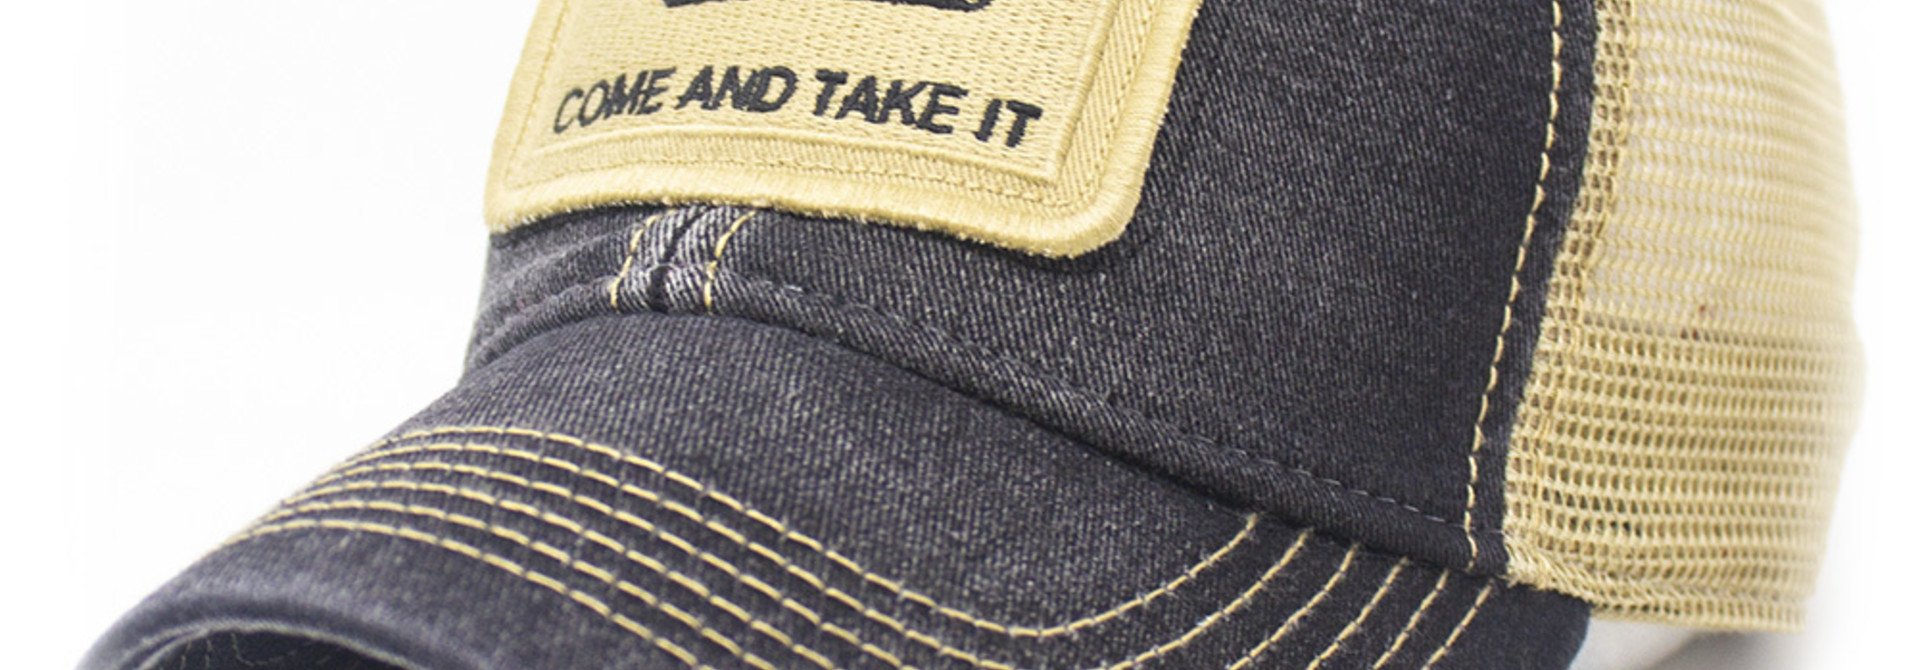 Come and Take It Trucker Hat, Black